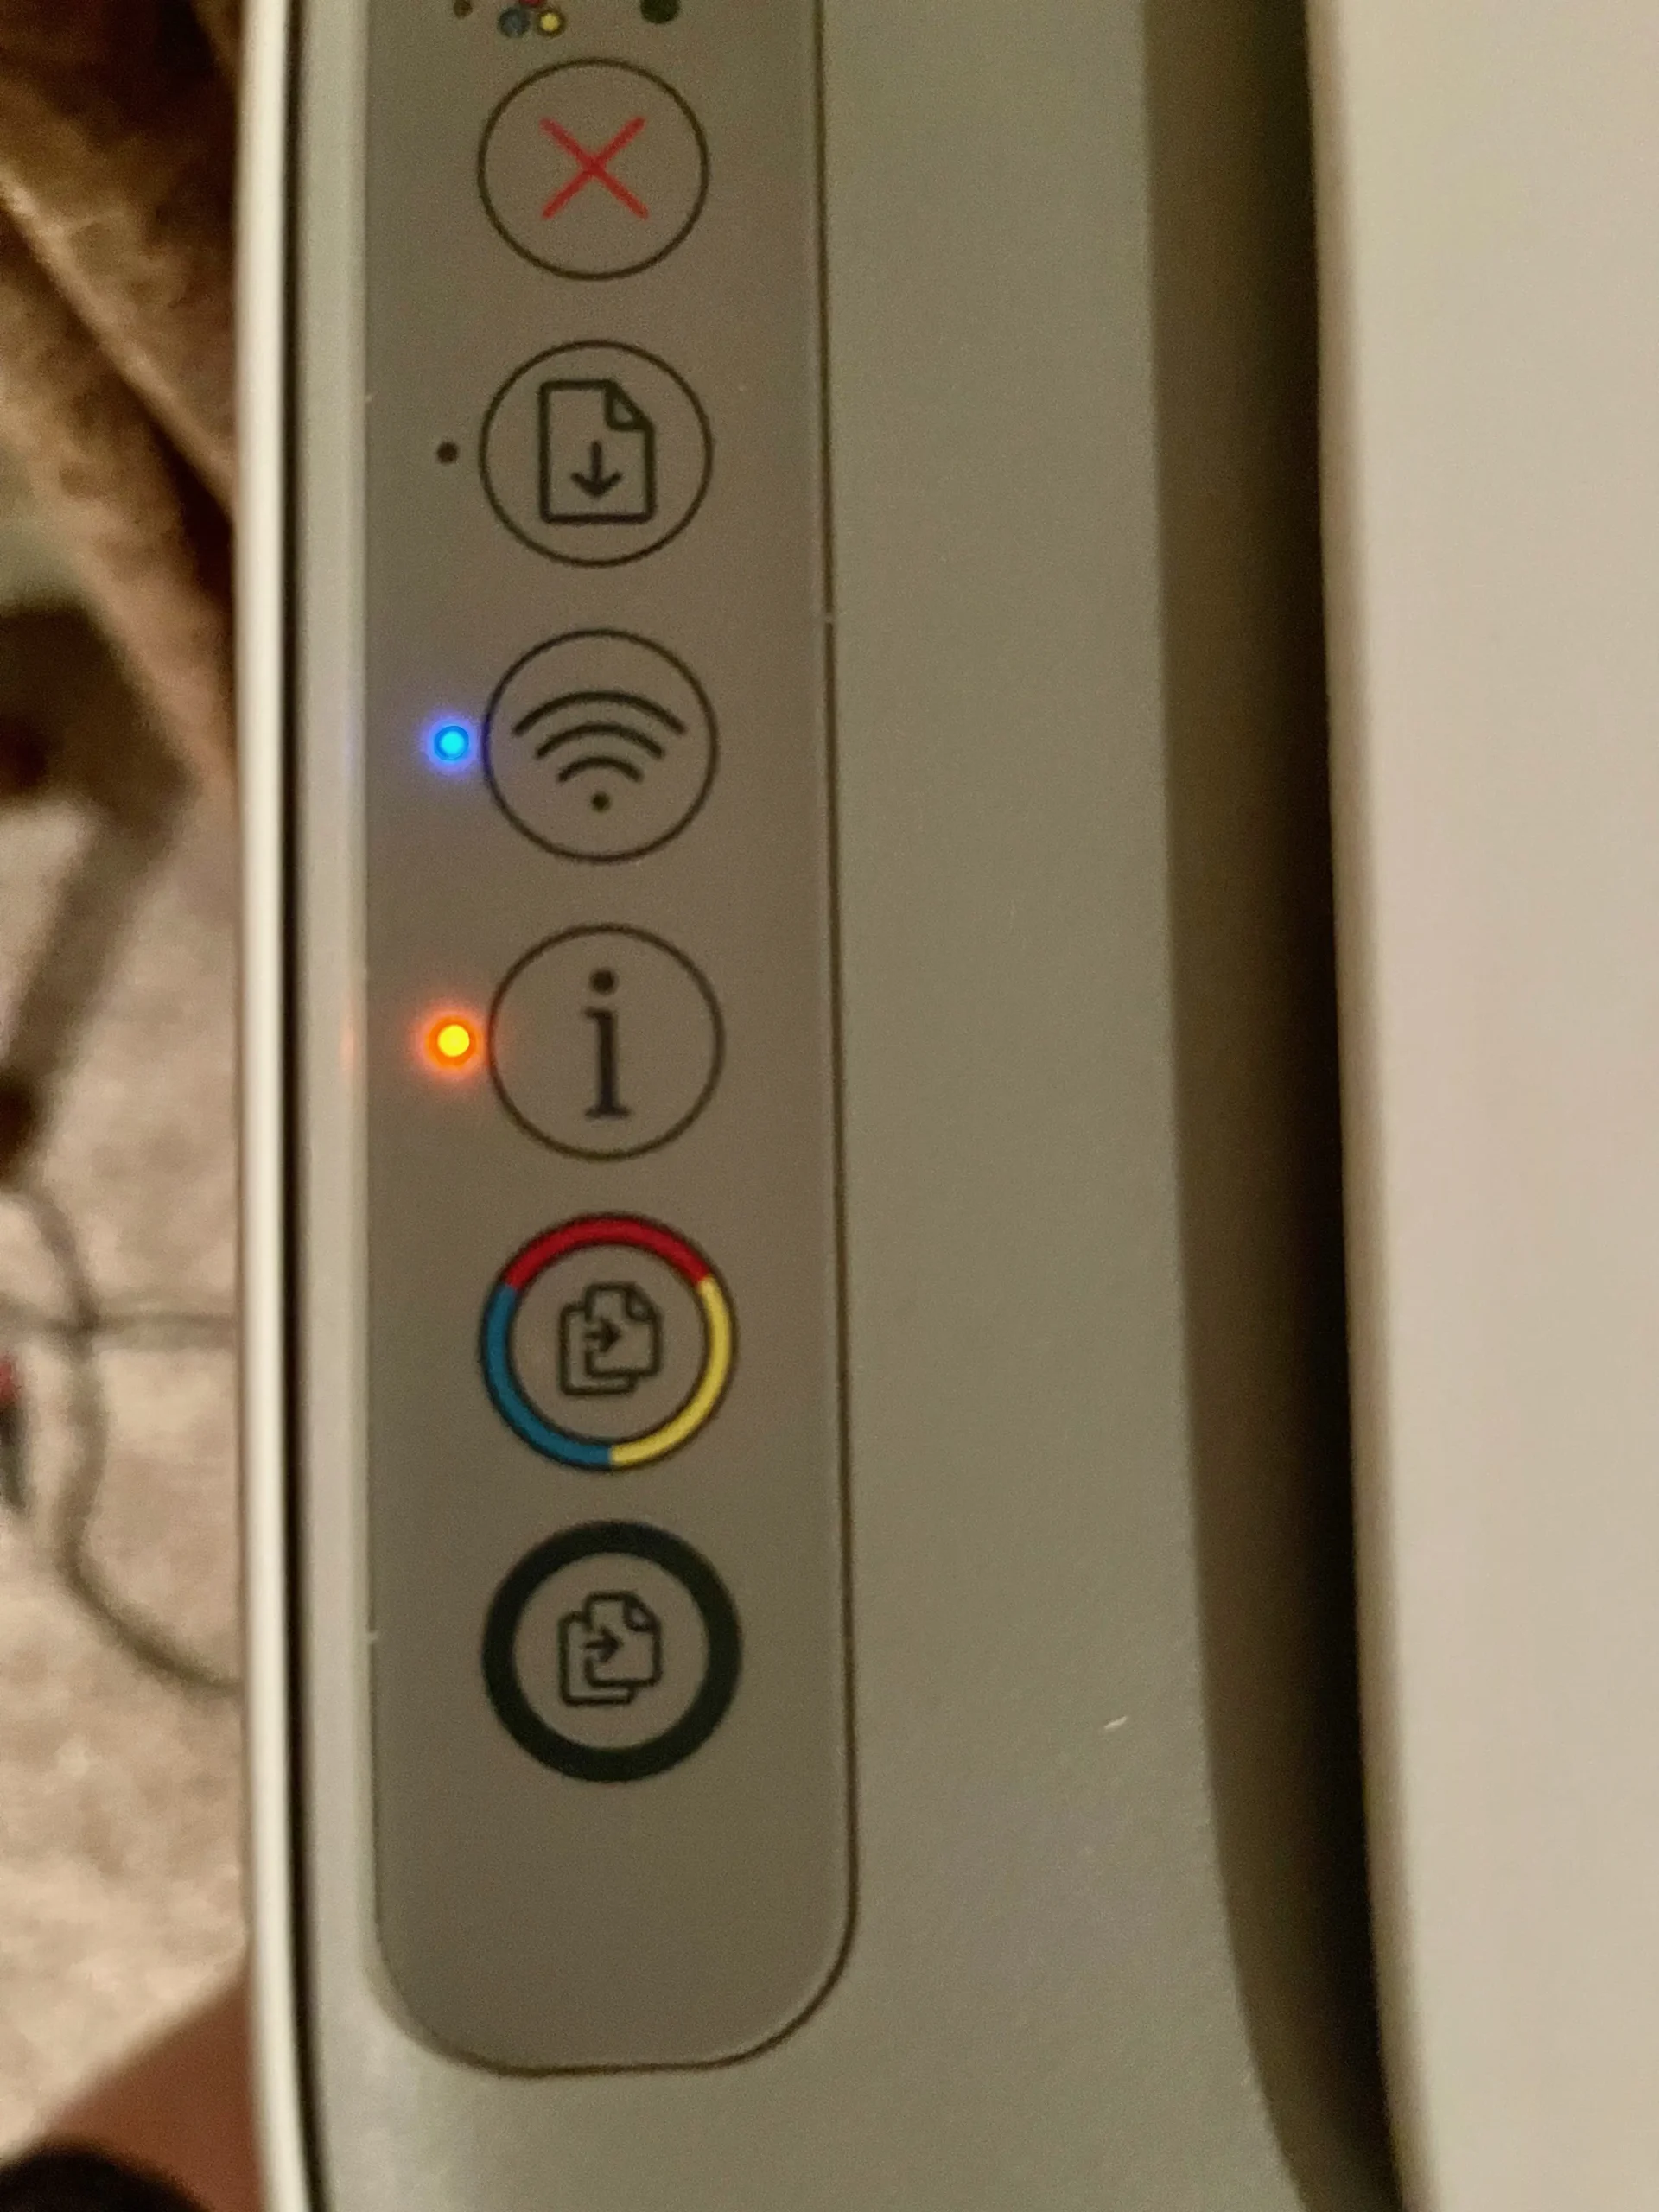 hewlett packard lighted icons on printer cabinet - Why is my HP printer printing weird symbols